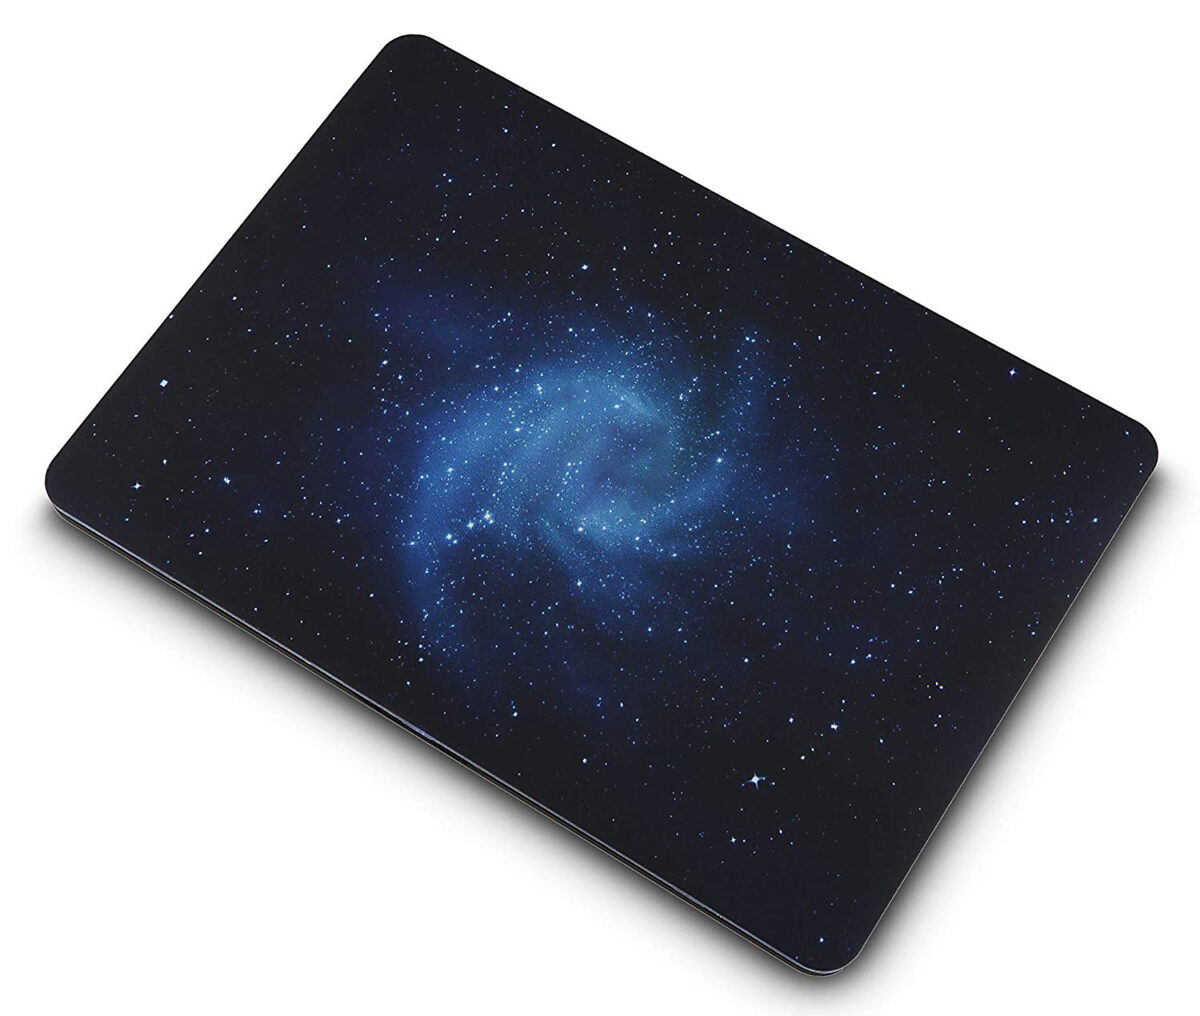 Plastic Hard shell cover for macbook